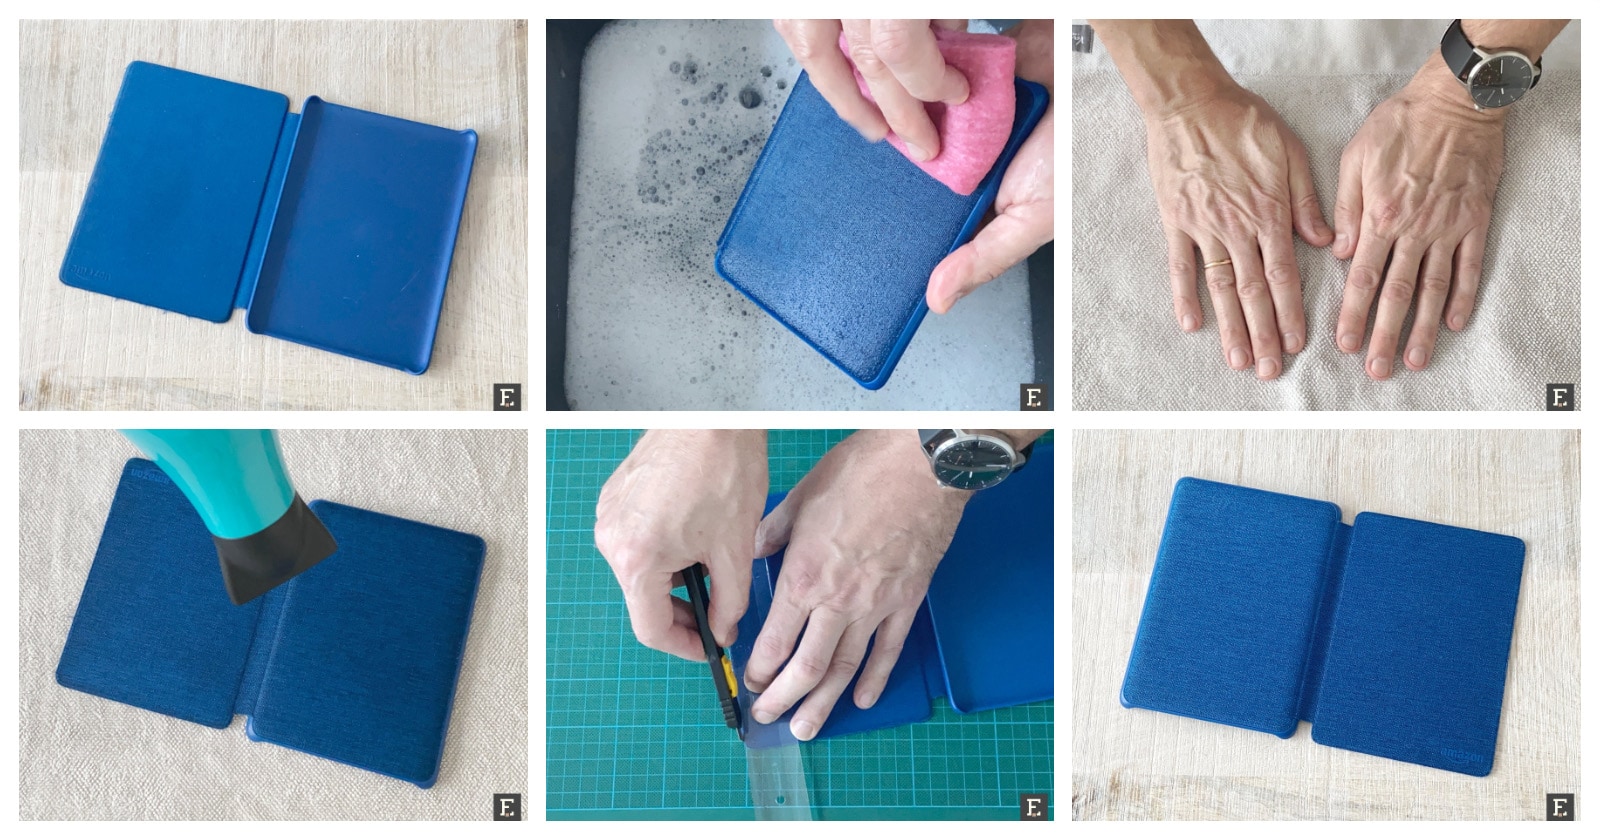 How to renew a fabric Kindle case – safely and quickly